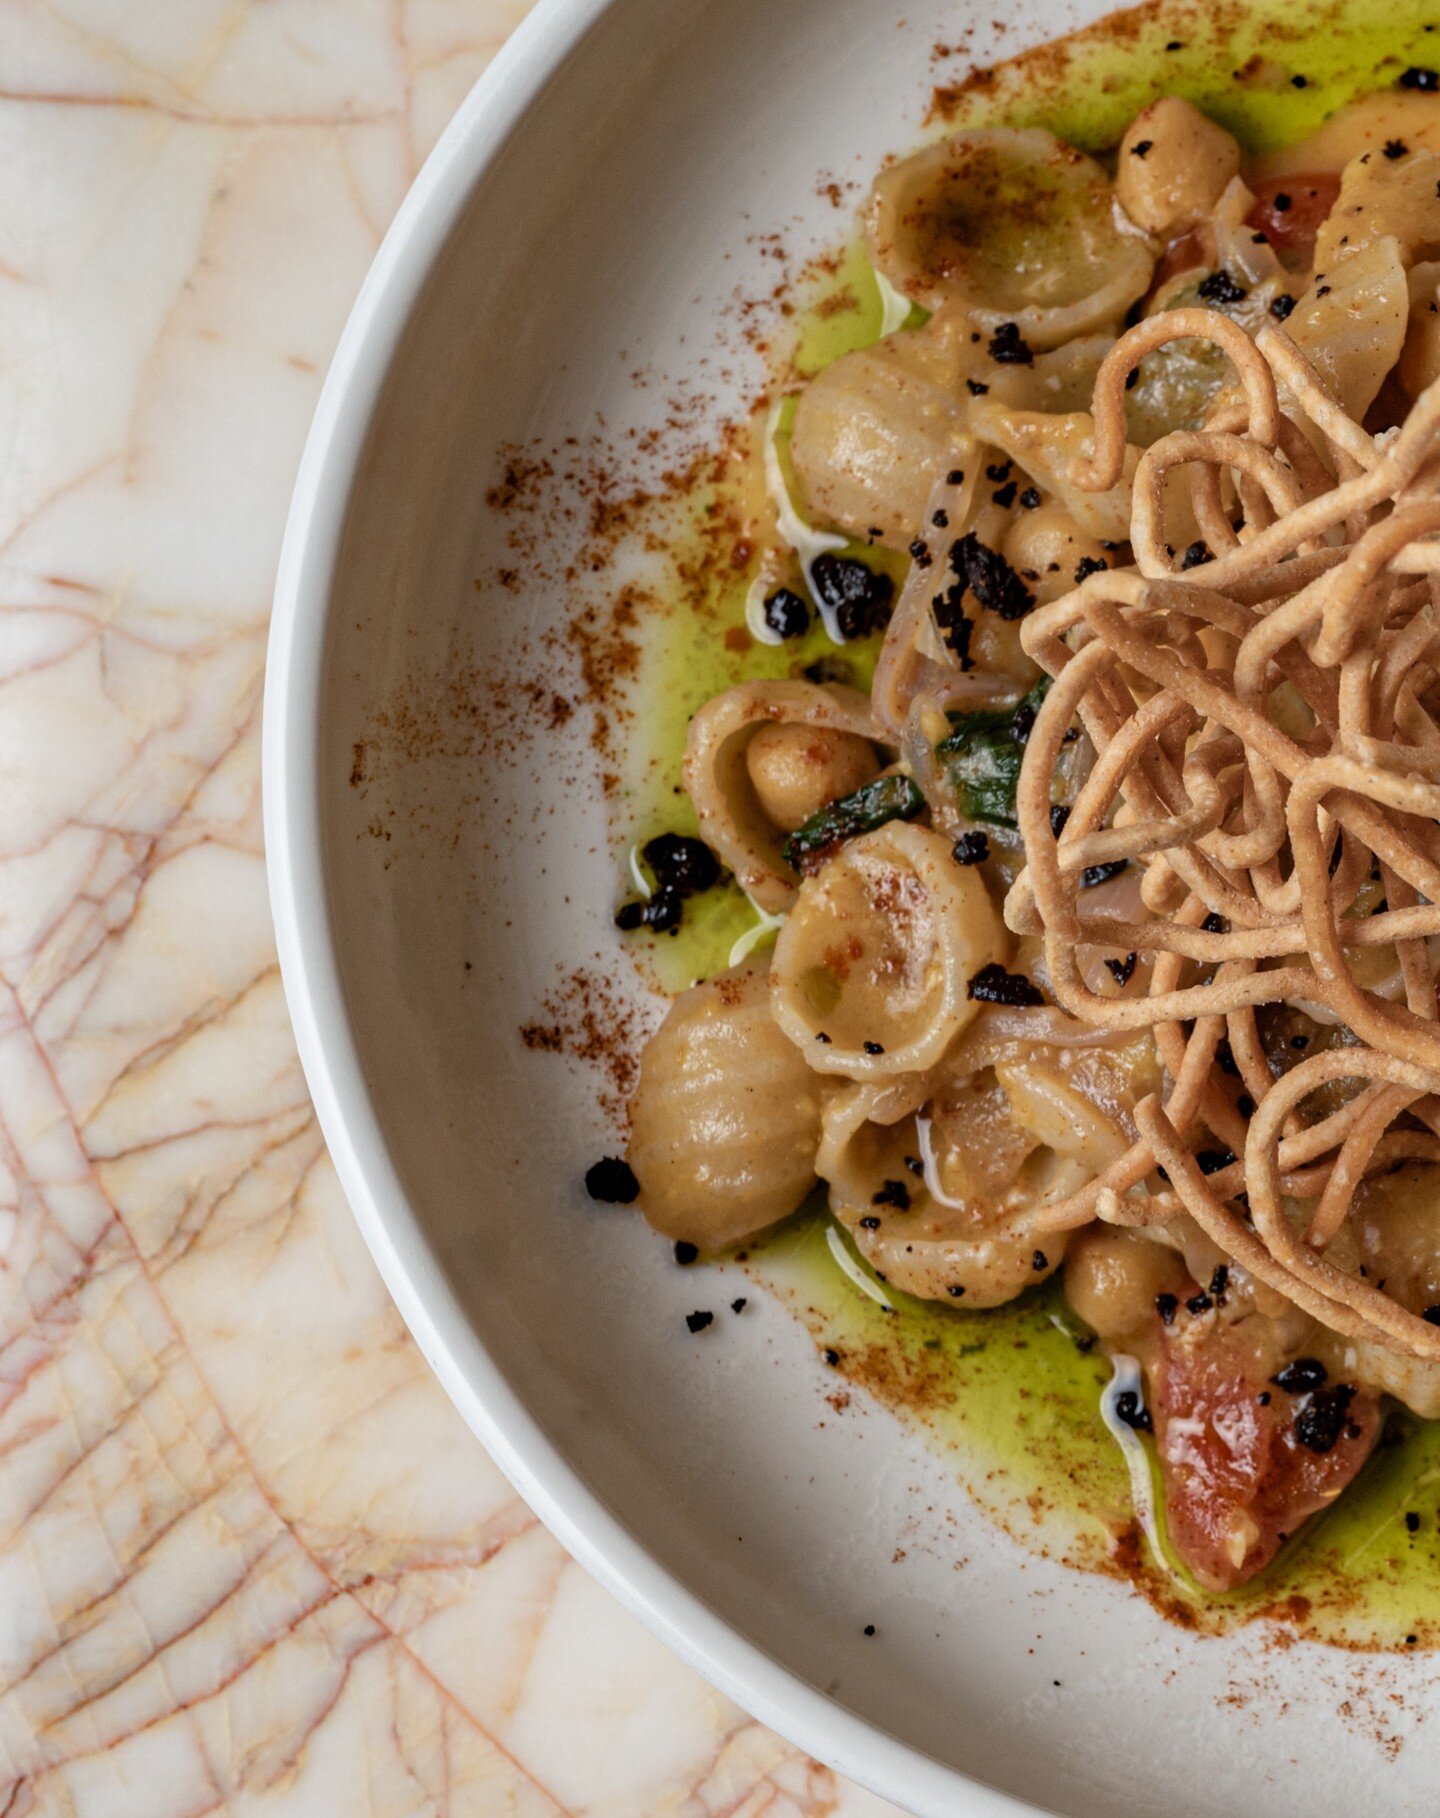 Orecchiette are a pasta typical of Apulia, a region of Southern Italy. Their name comes from the direct translation of 'little ears.' 
Ours is served with guanciale (pork cheek,) chilli, dried olives, basil oil and some crispy pasta for added texture